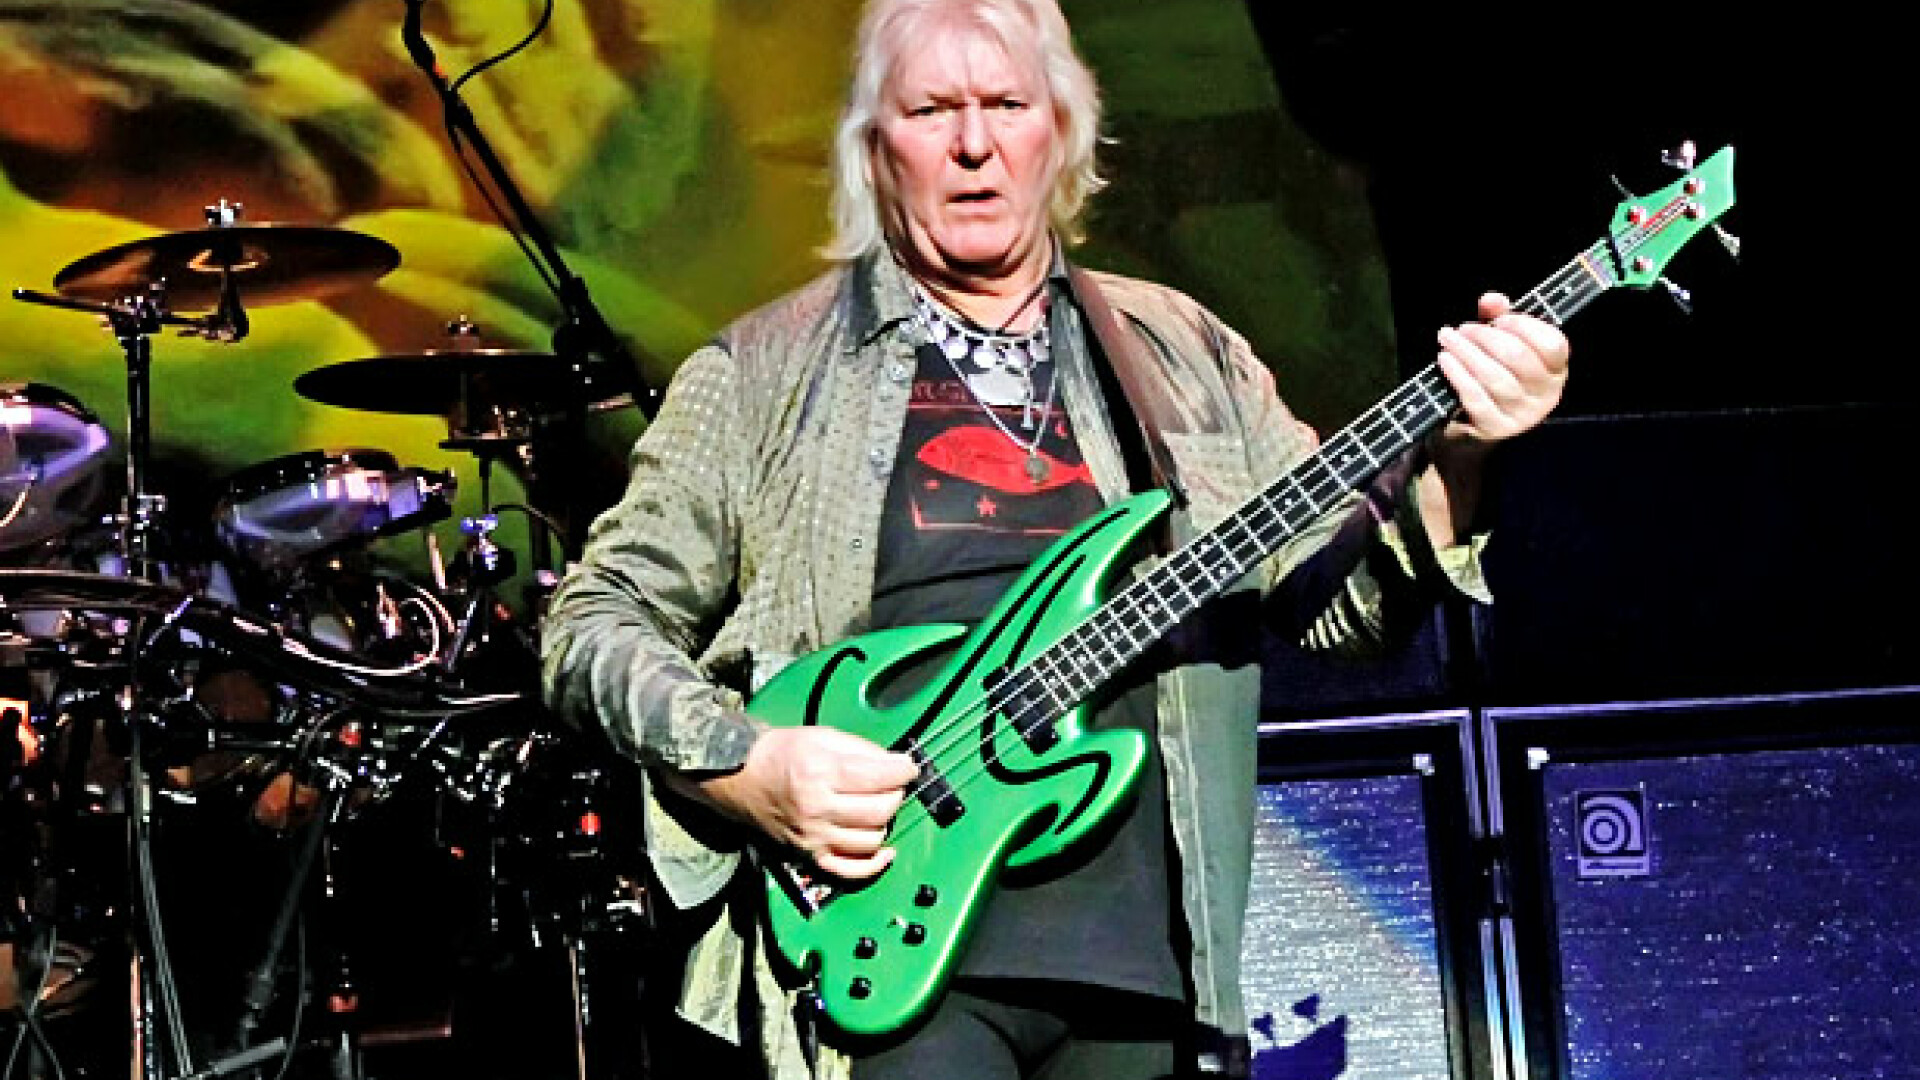 Yes, Chris Squire